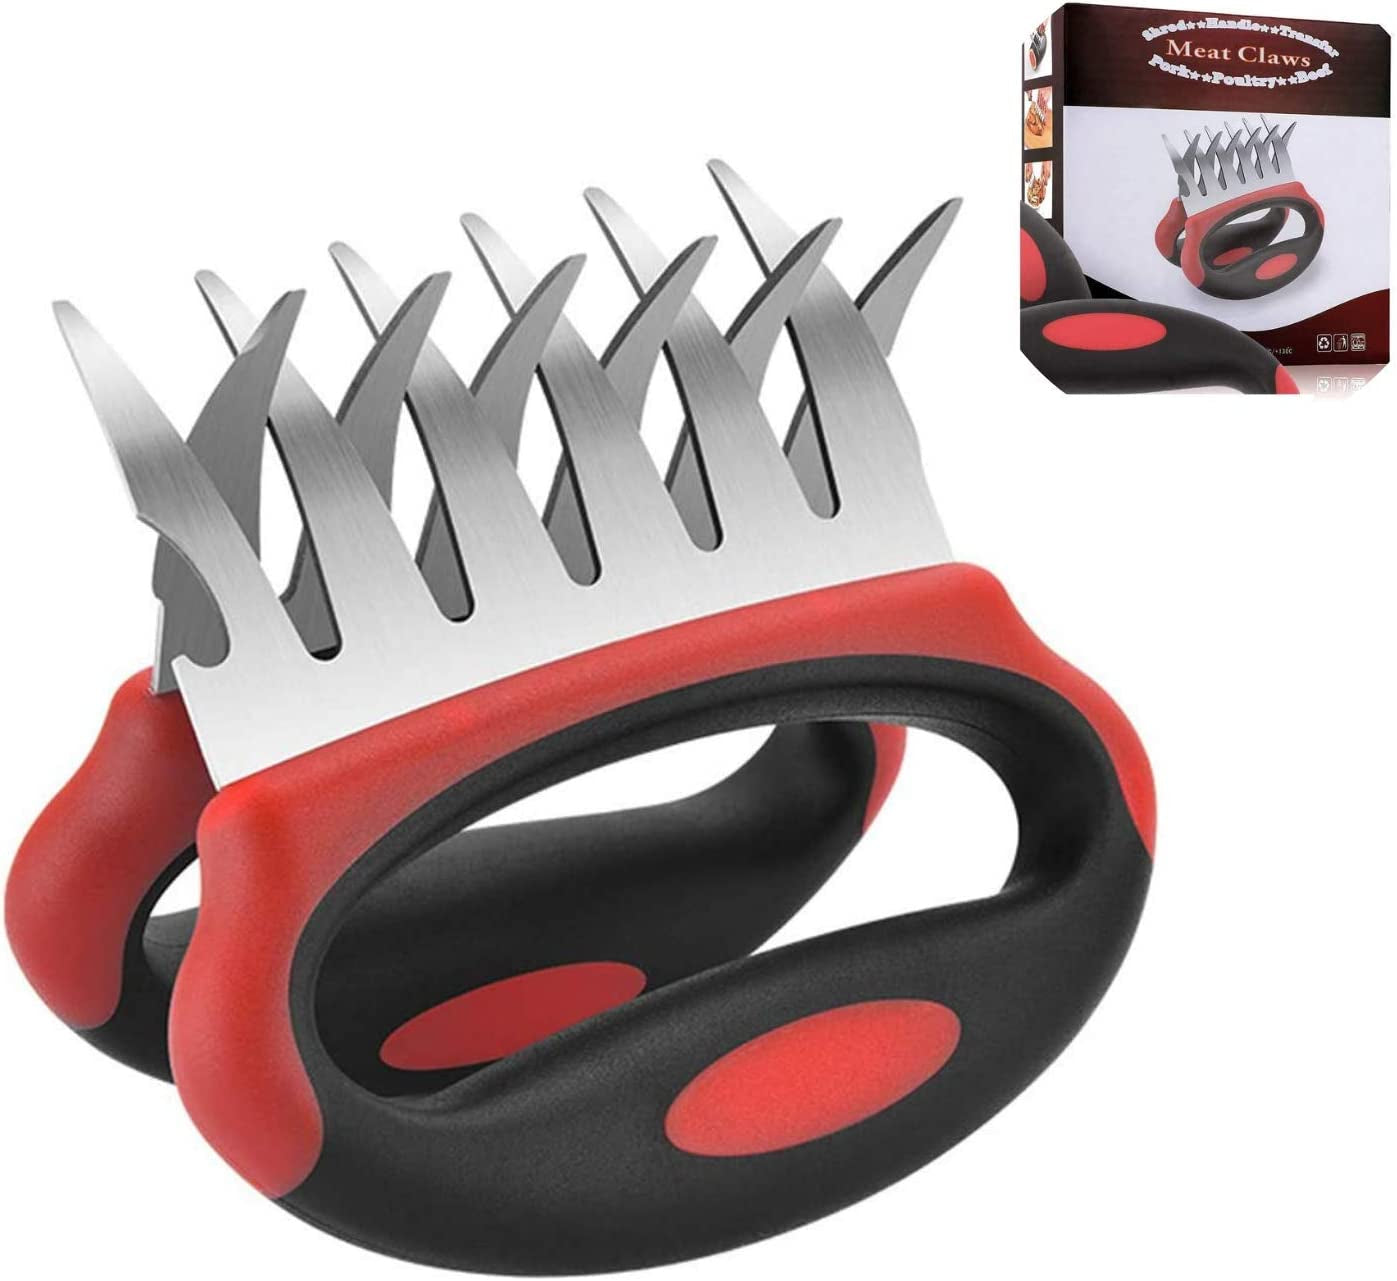 STWIE, Meat Claws Stainless Steel Shredder Claw Bear Paw for Shredding Meat Pull Pork Turkey Lifter Solid BBQ Metal Claw Meat Crumbler with TPR Handle BPA Free Heat Resistant Dishwasher Stocking Stuffer Idea